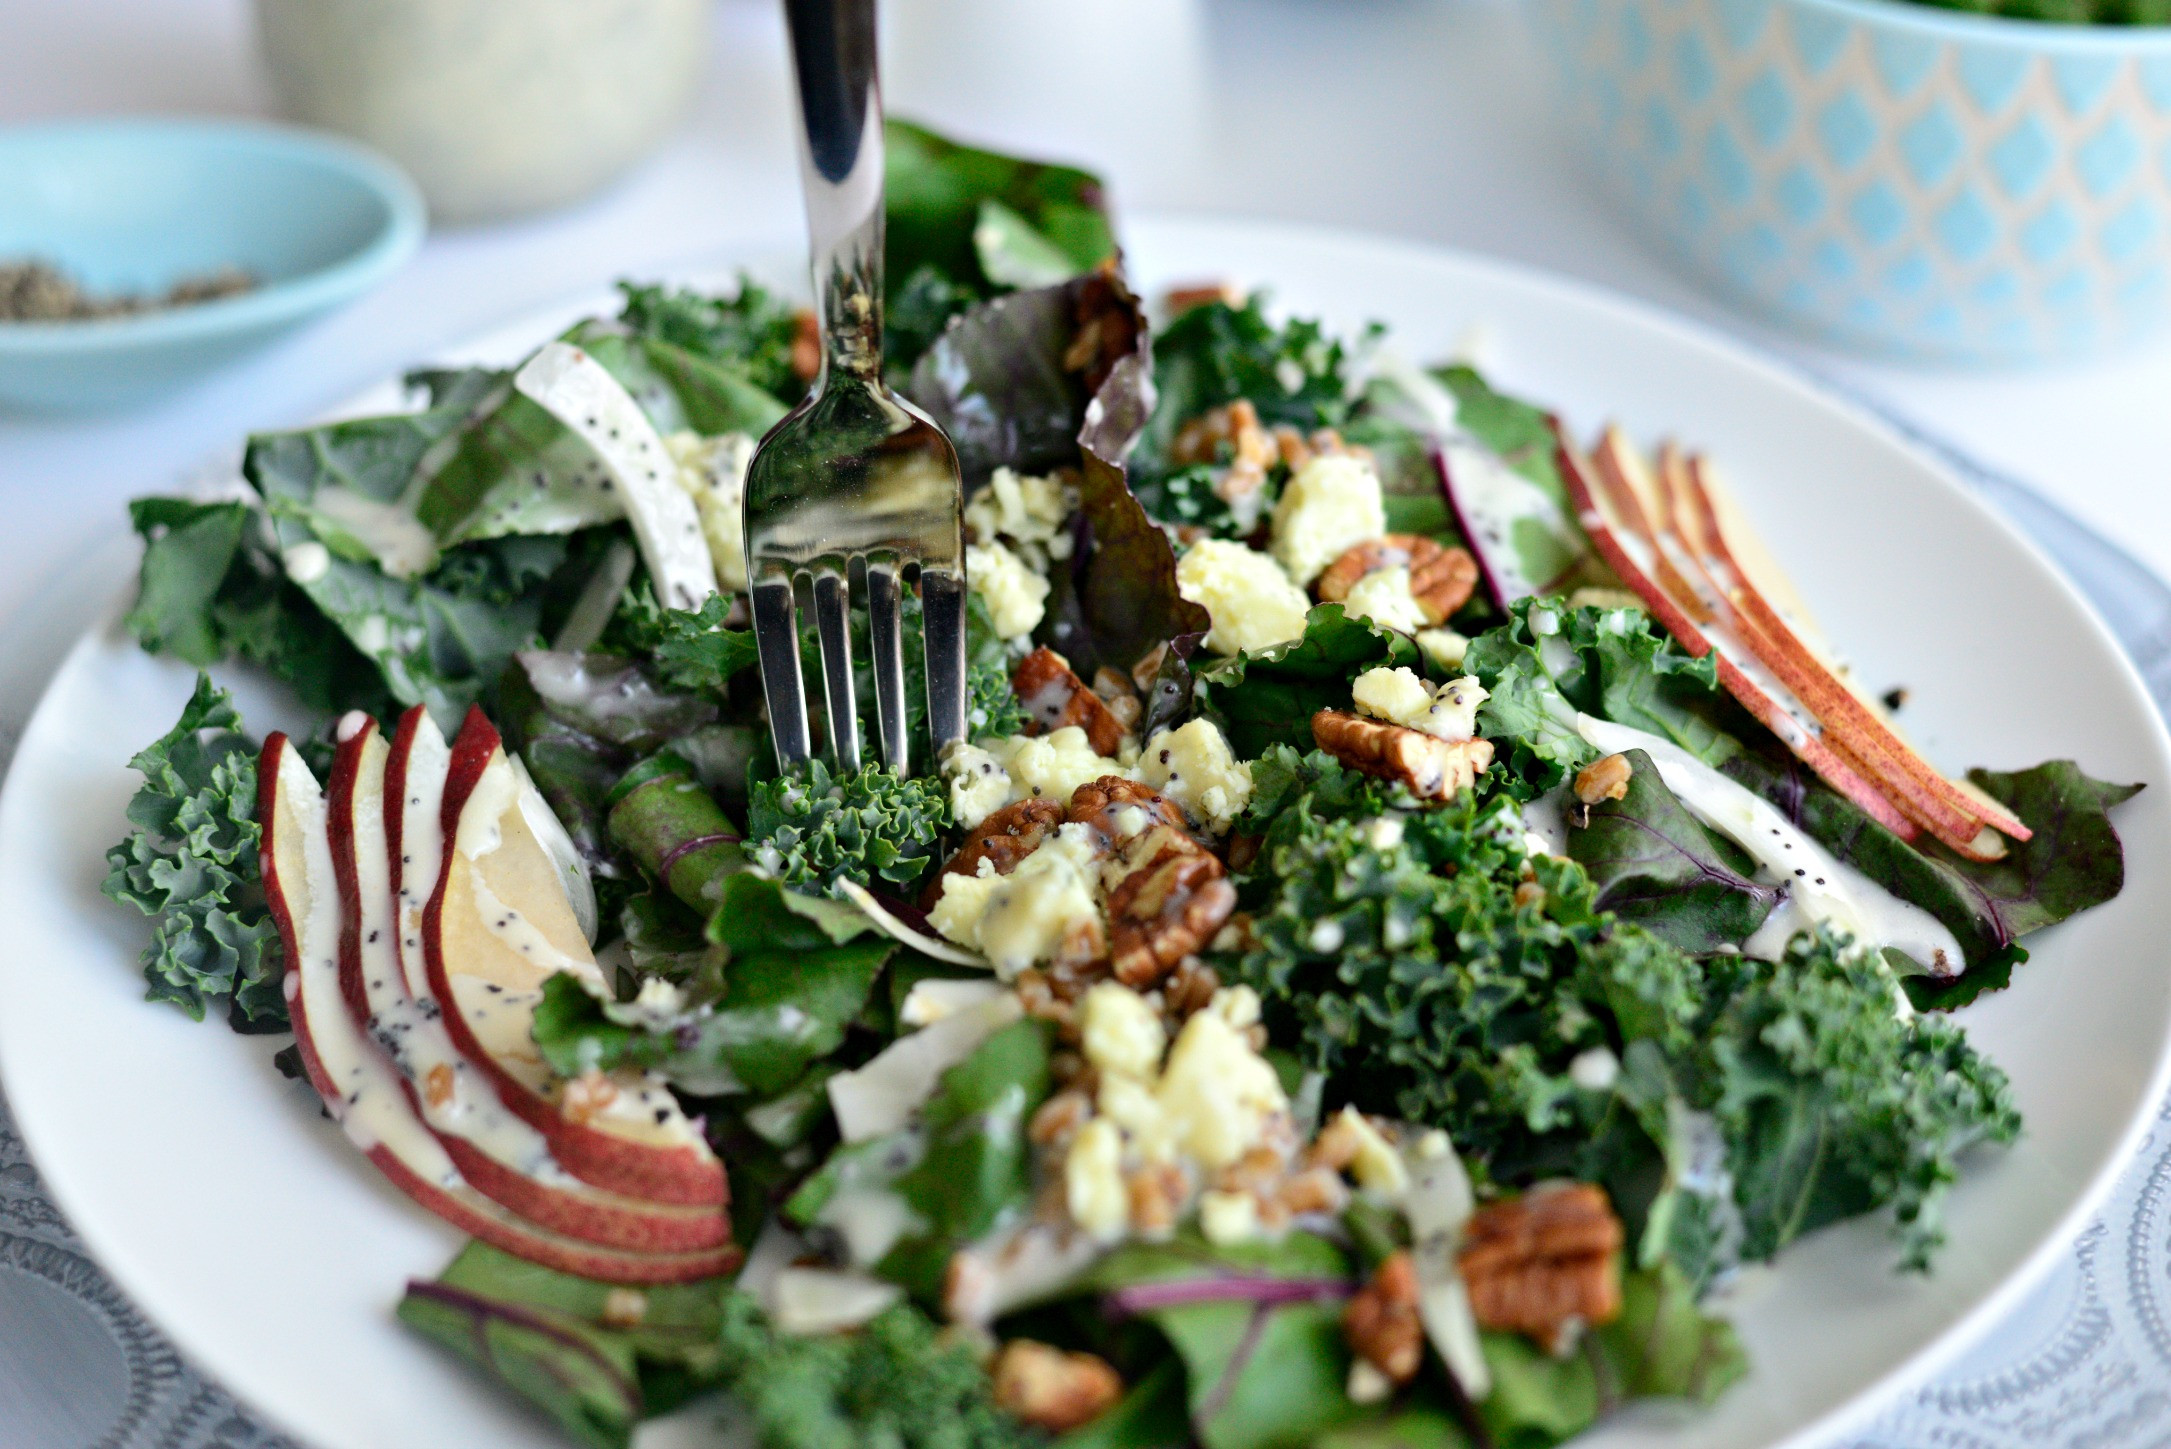 Beet Greens Salad
 Simply Scratch Winter Kale and Beet Greens Salad with Pear